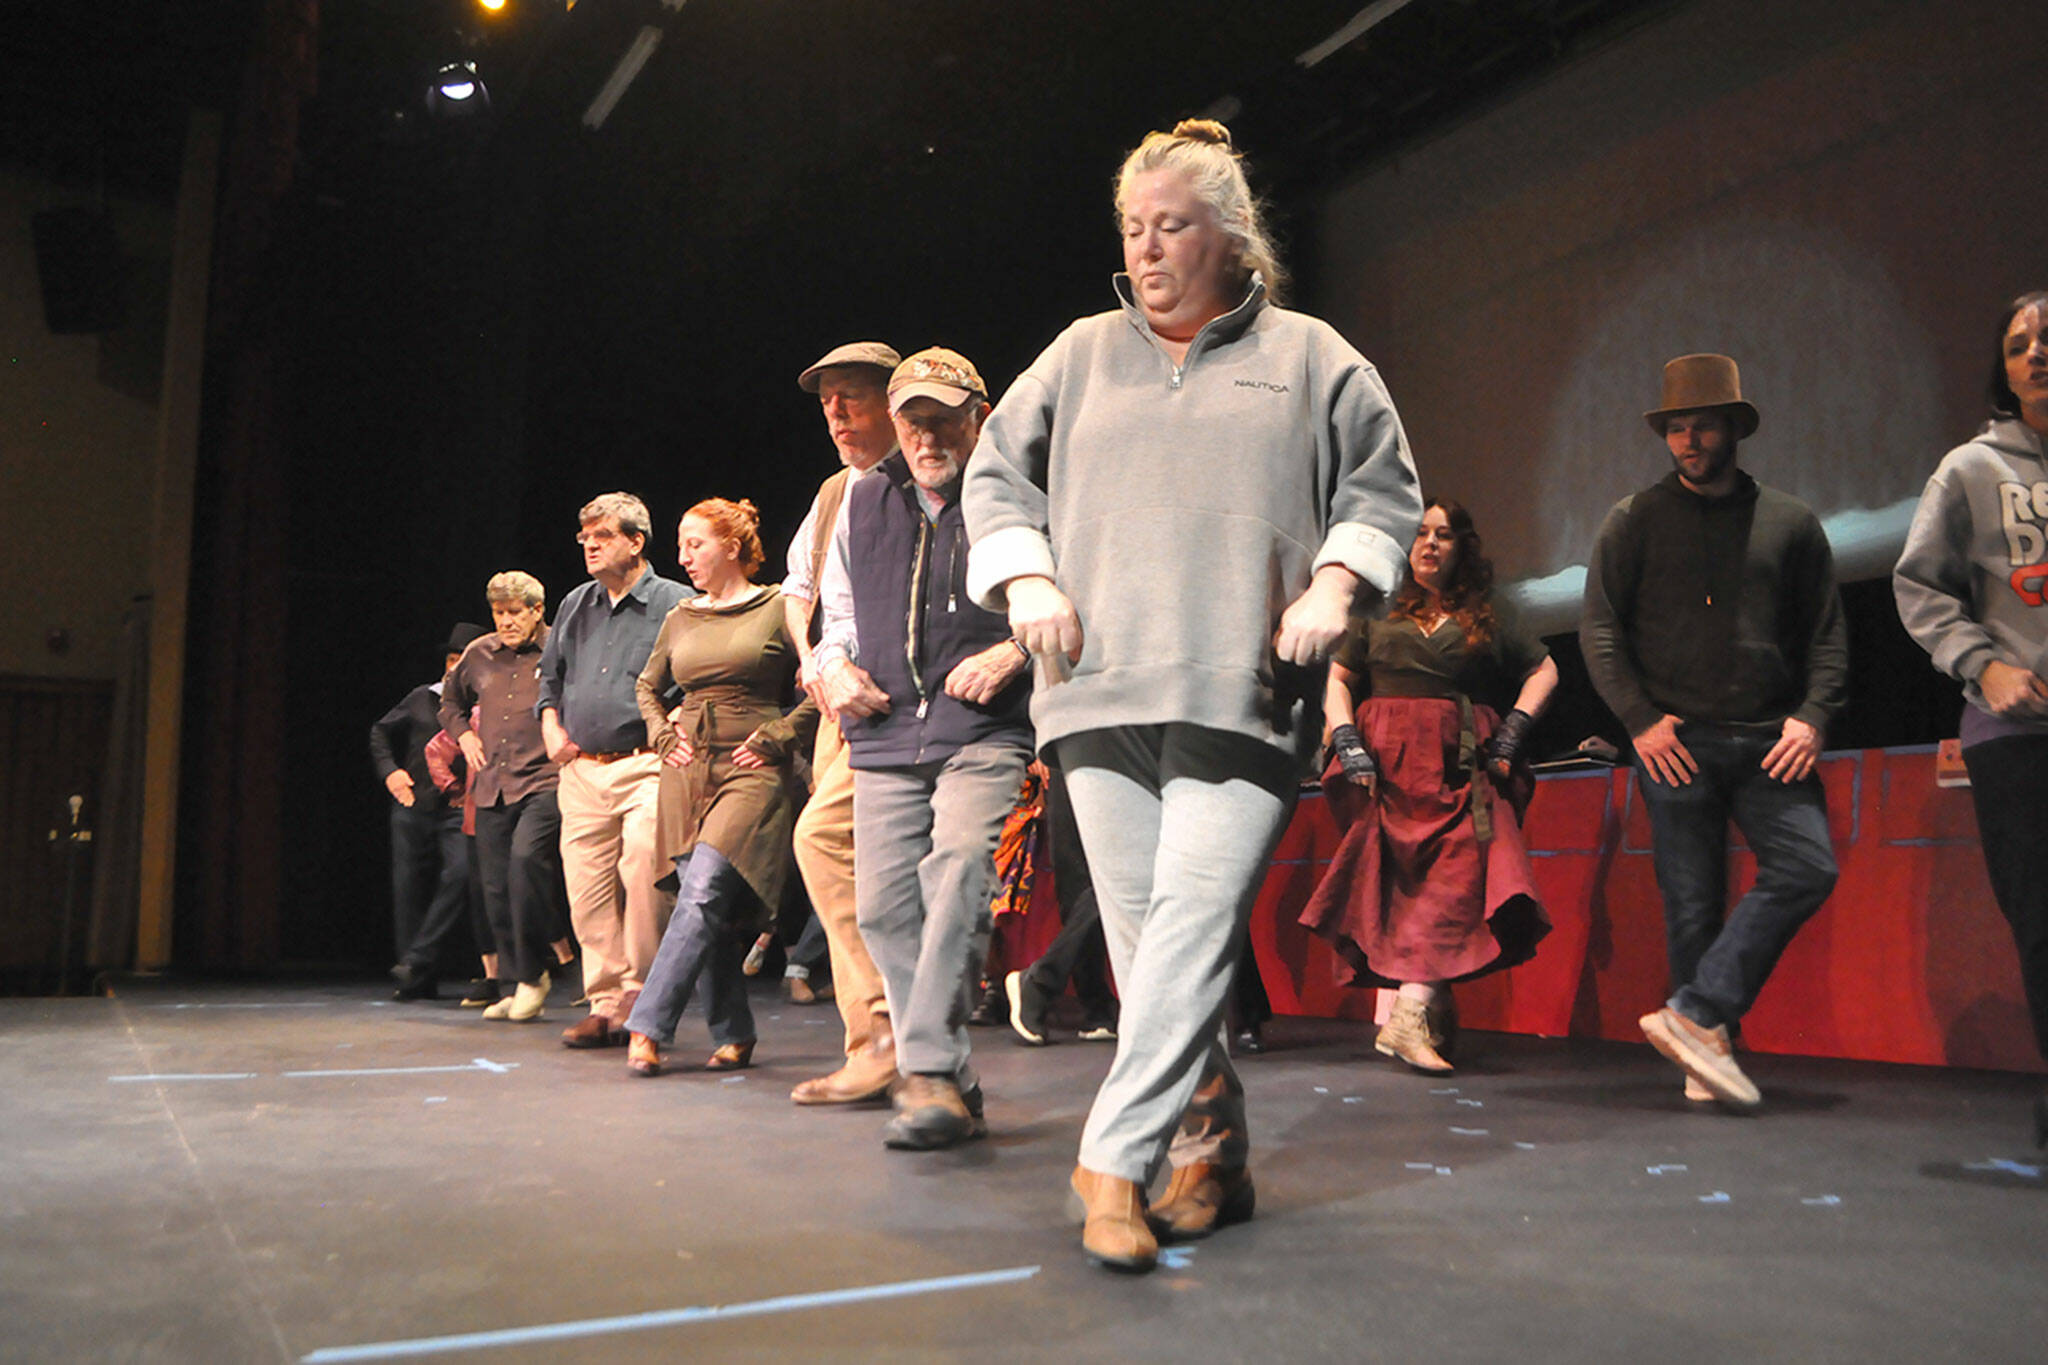 Sequim Gazette photo by Matthew Nash/ Beth McHugh as Princess Puffer, front, practices a dance number with other cast members in “The Mystery of Edwin Drood” at Olympic Theatre Arts running March 10-26. The musical comedy invites audience members’ participation to vote on the murderer, and more.